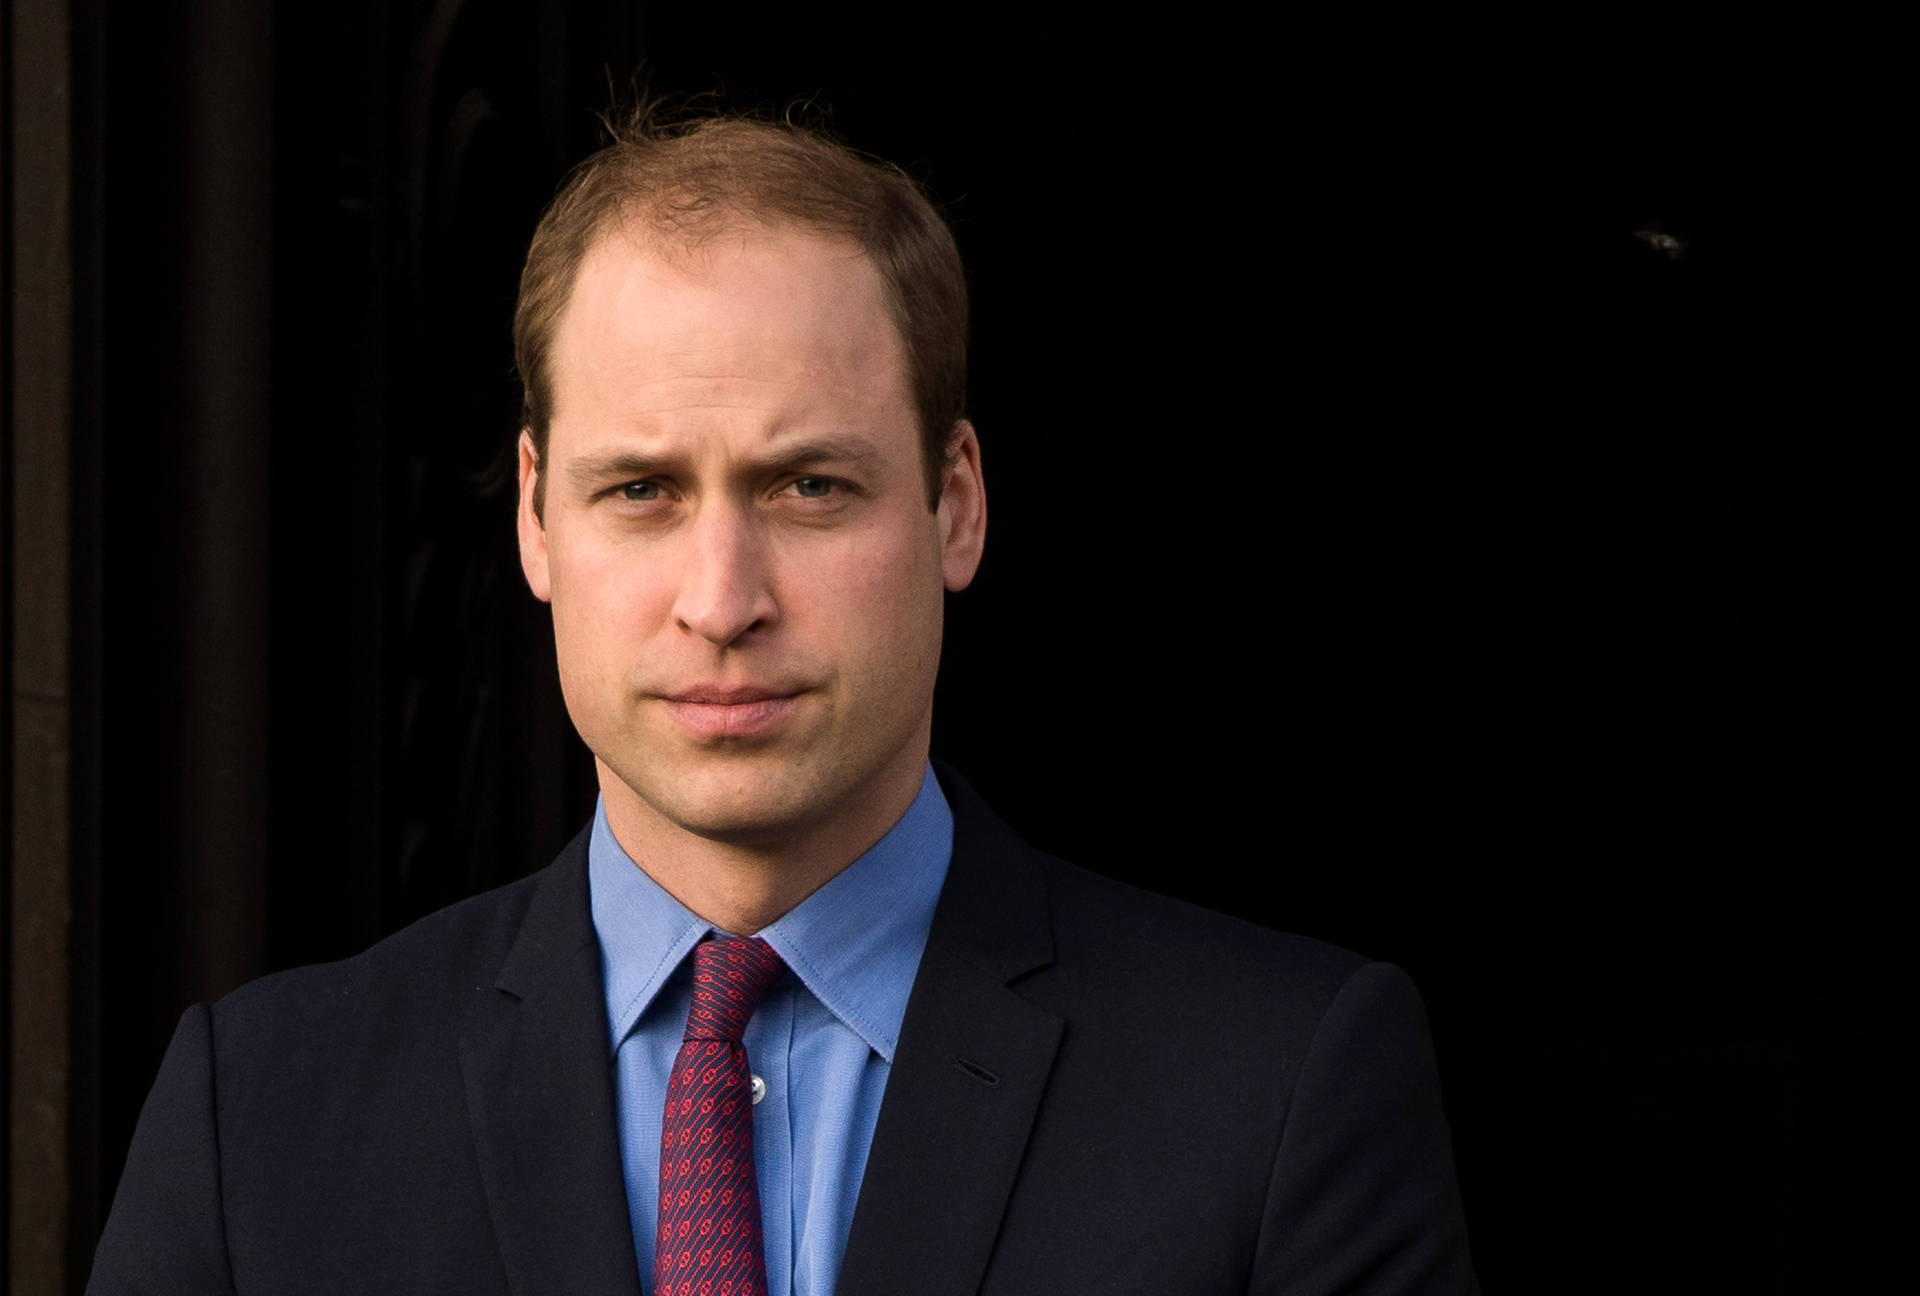 Prince William With Serious Expression Background